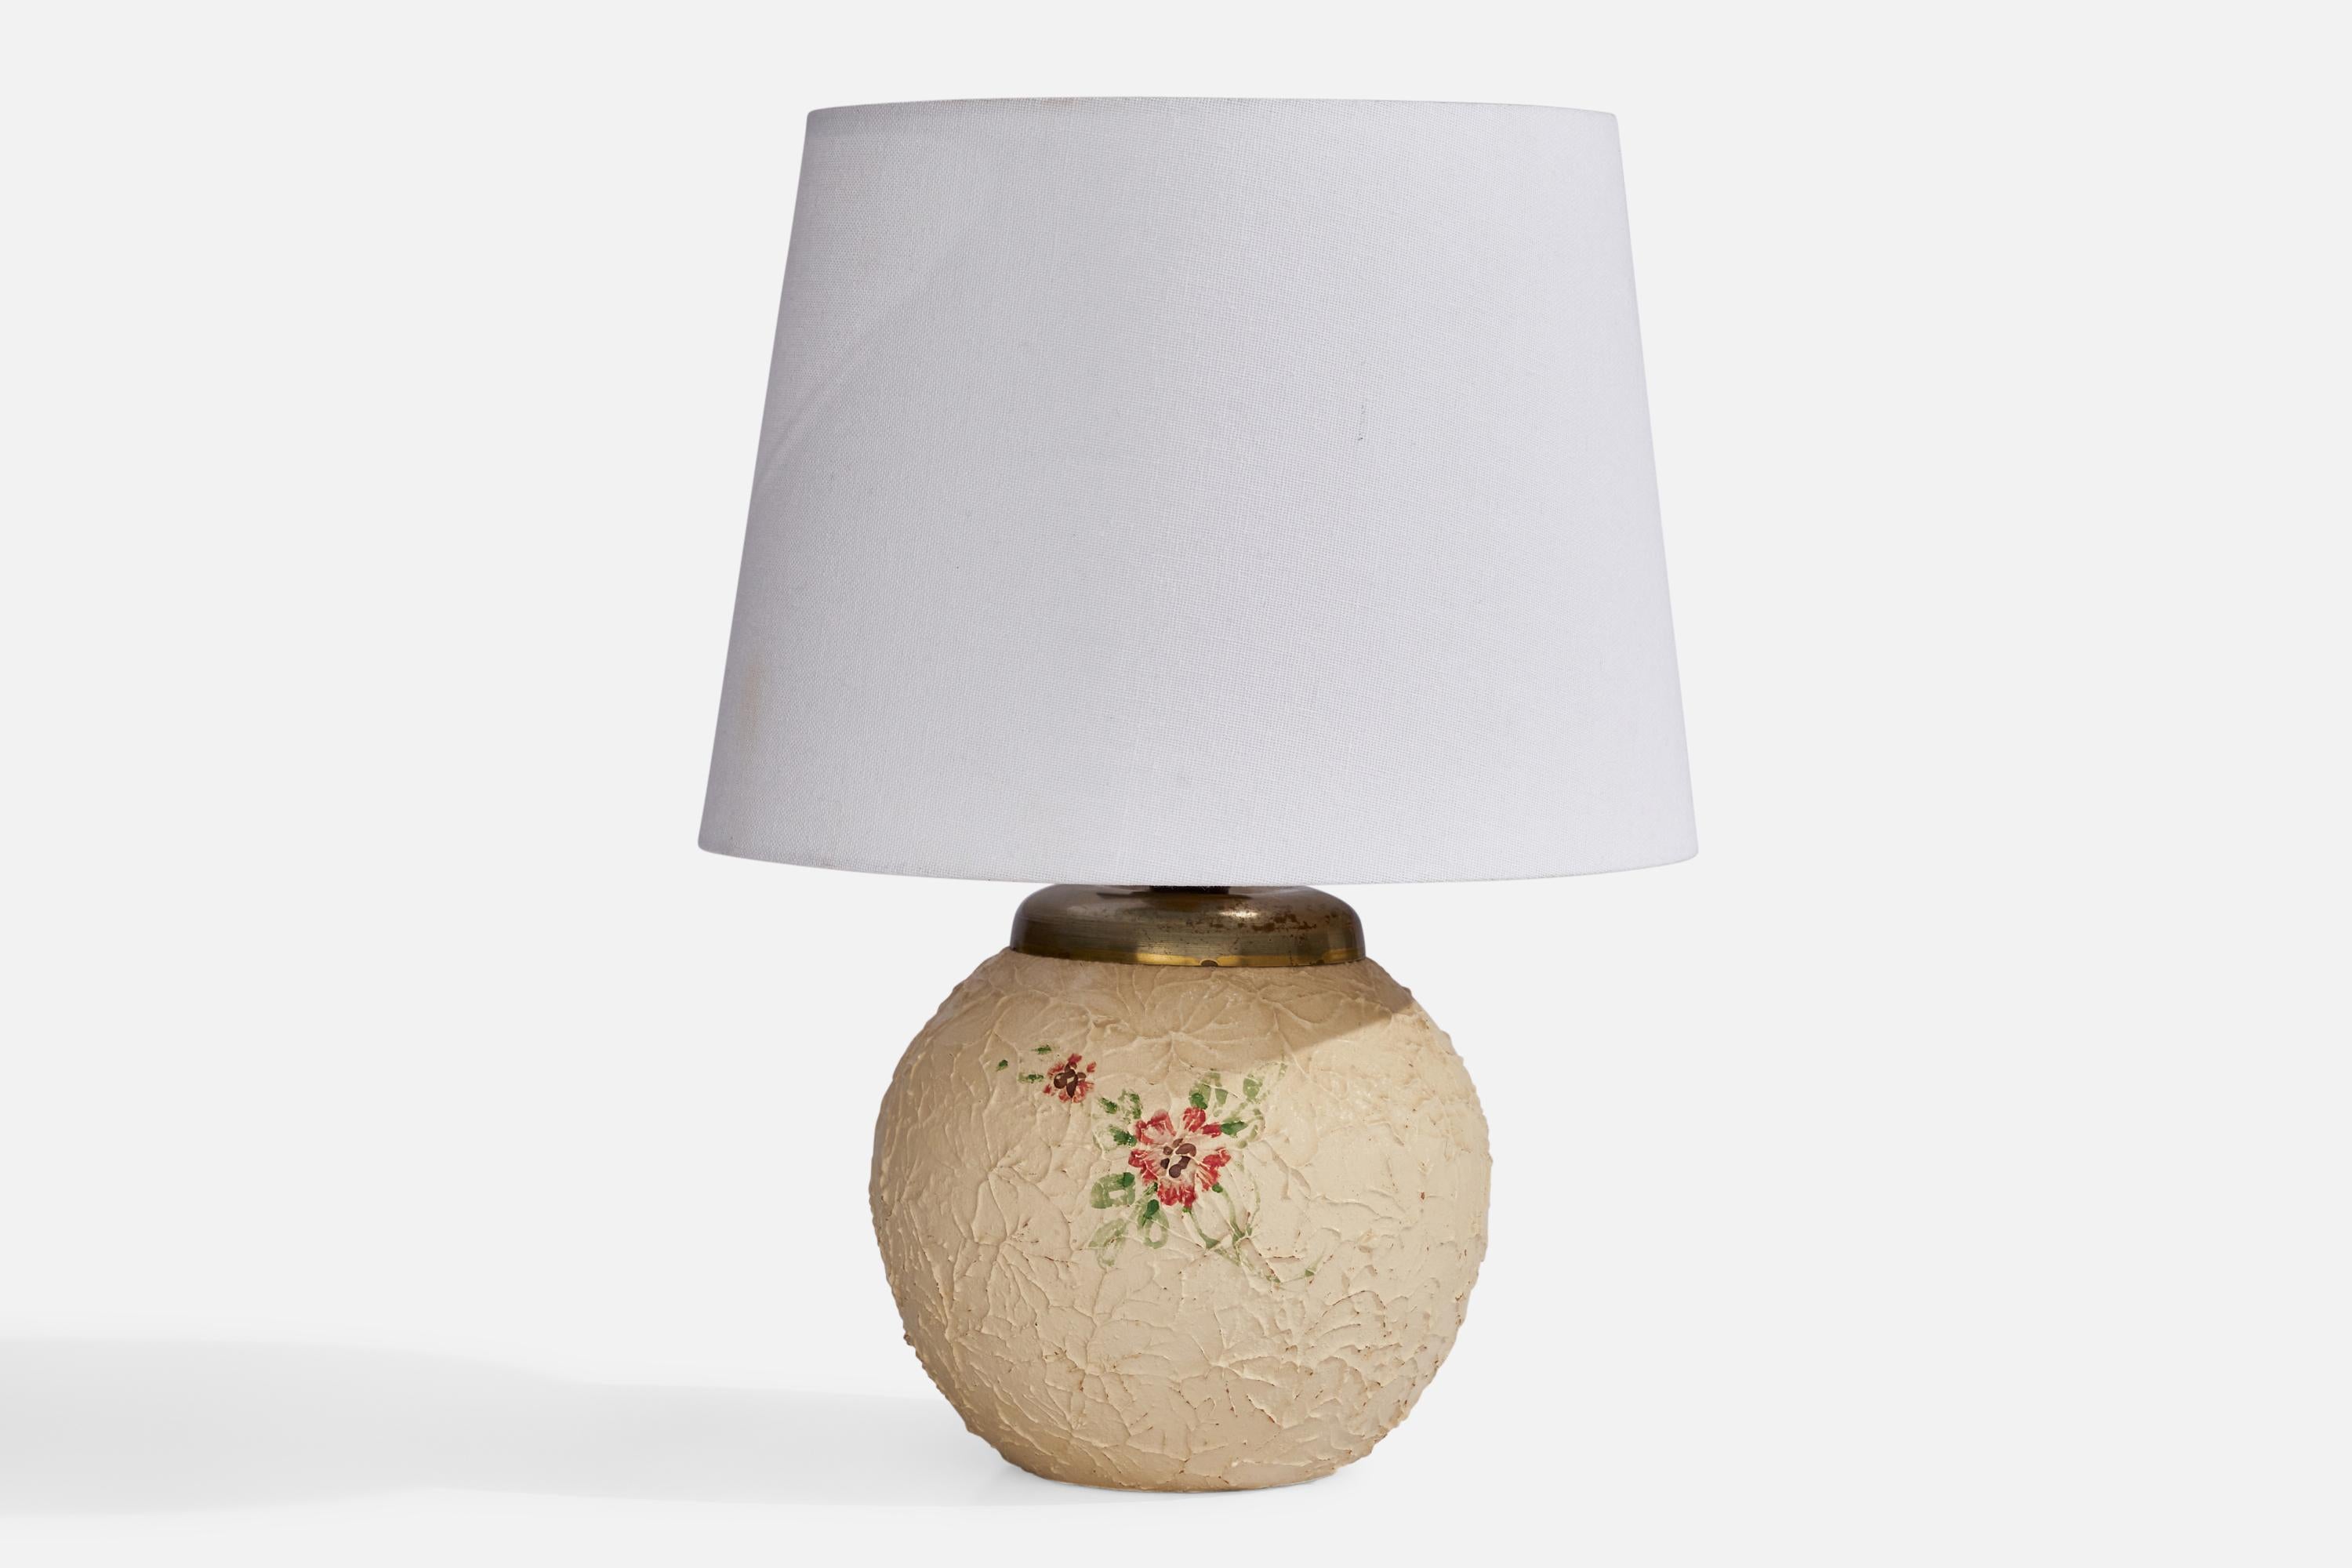 A hand-painted beige ceramic and brass table lamp designed and produced in Sweden, c. 1920s.

Dimensions of Lamp (inches): 8.9” H x 6” Diameter
Dimensions of Shade (inches): 8” Top Diameter x 10” Bottom Diameter x 7.25” H
Dimensions of Lamp with